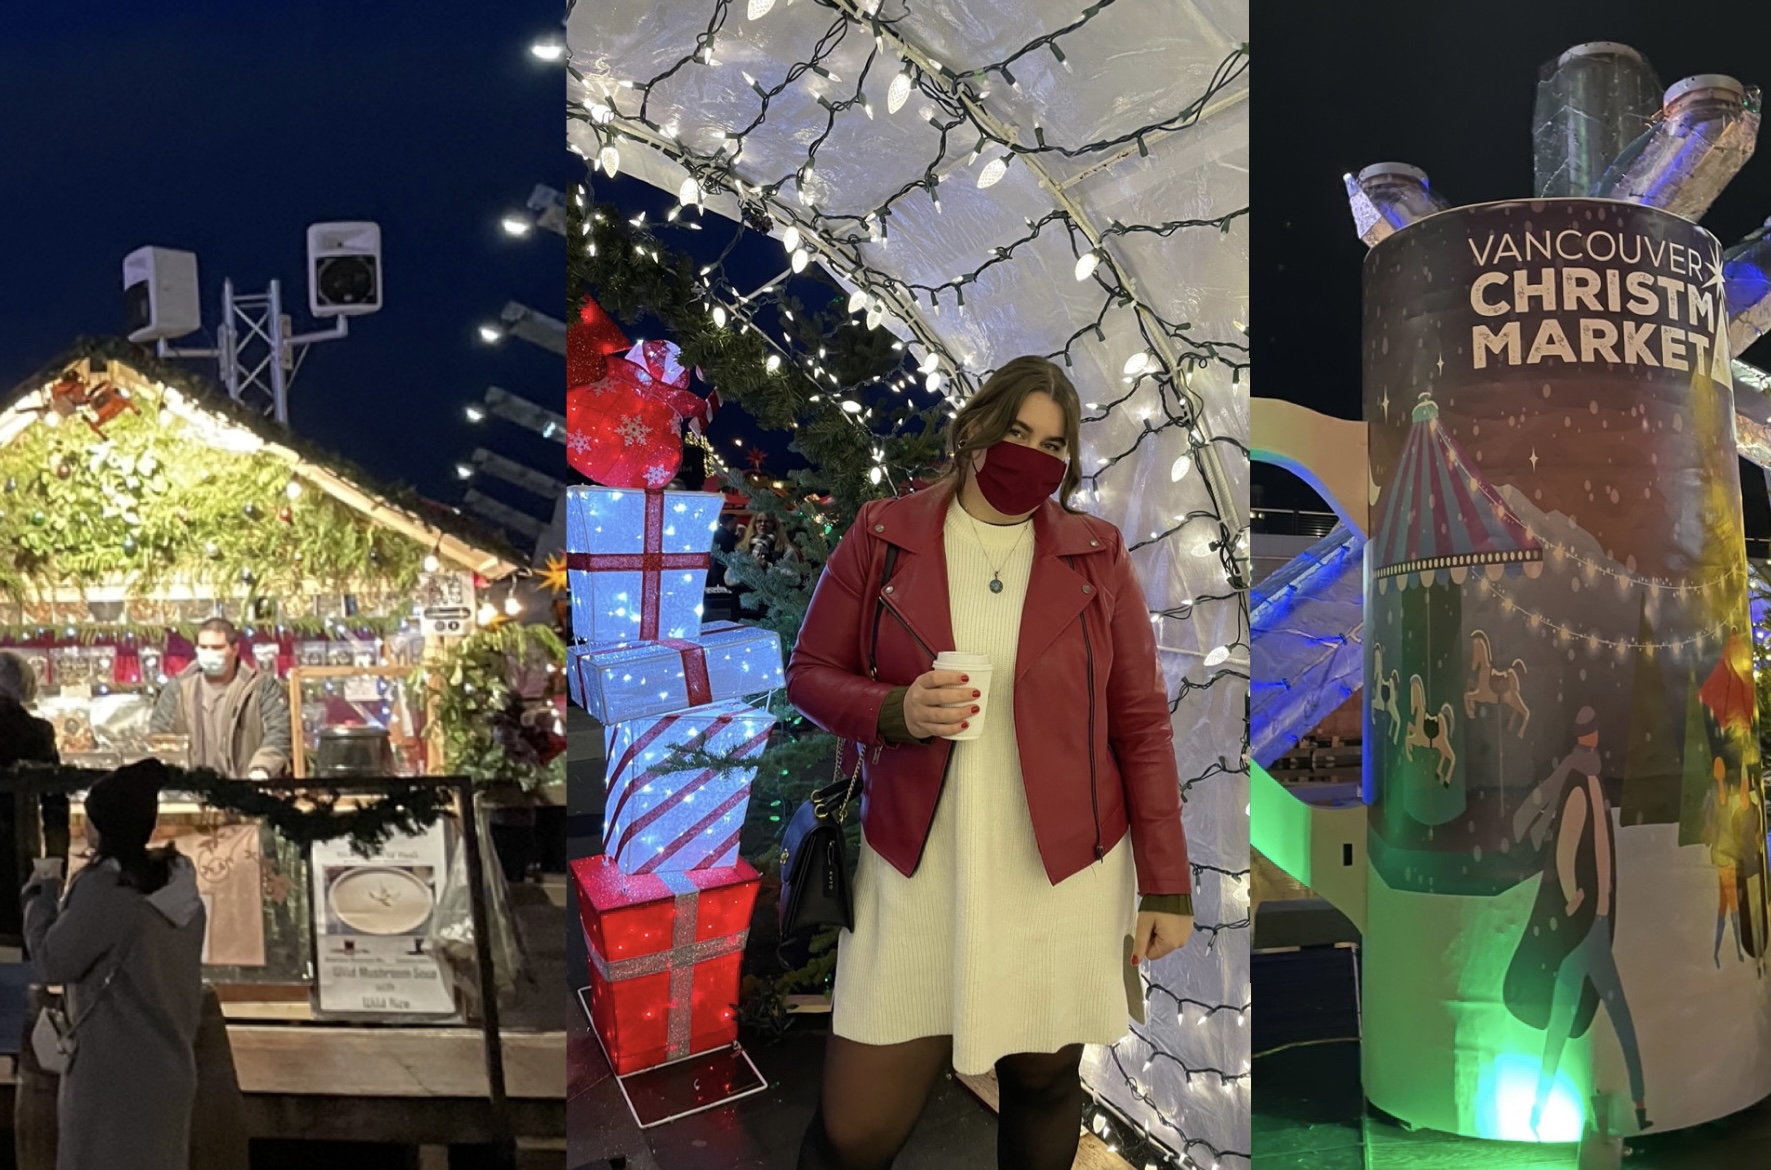 Kate’s Review of The Vancouver Christmas Market